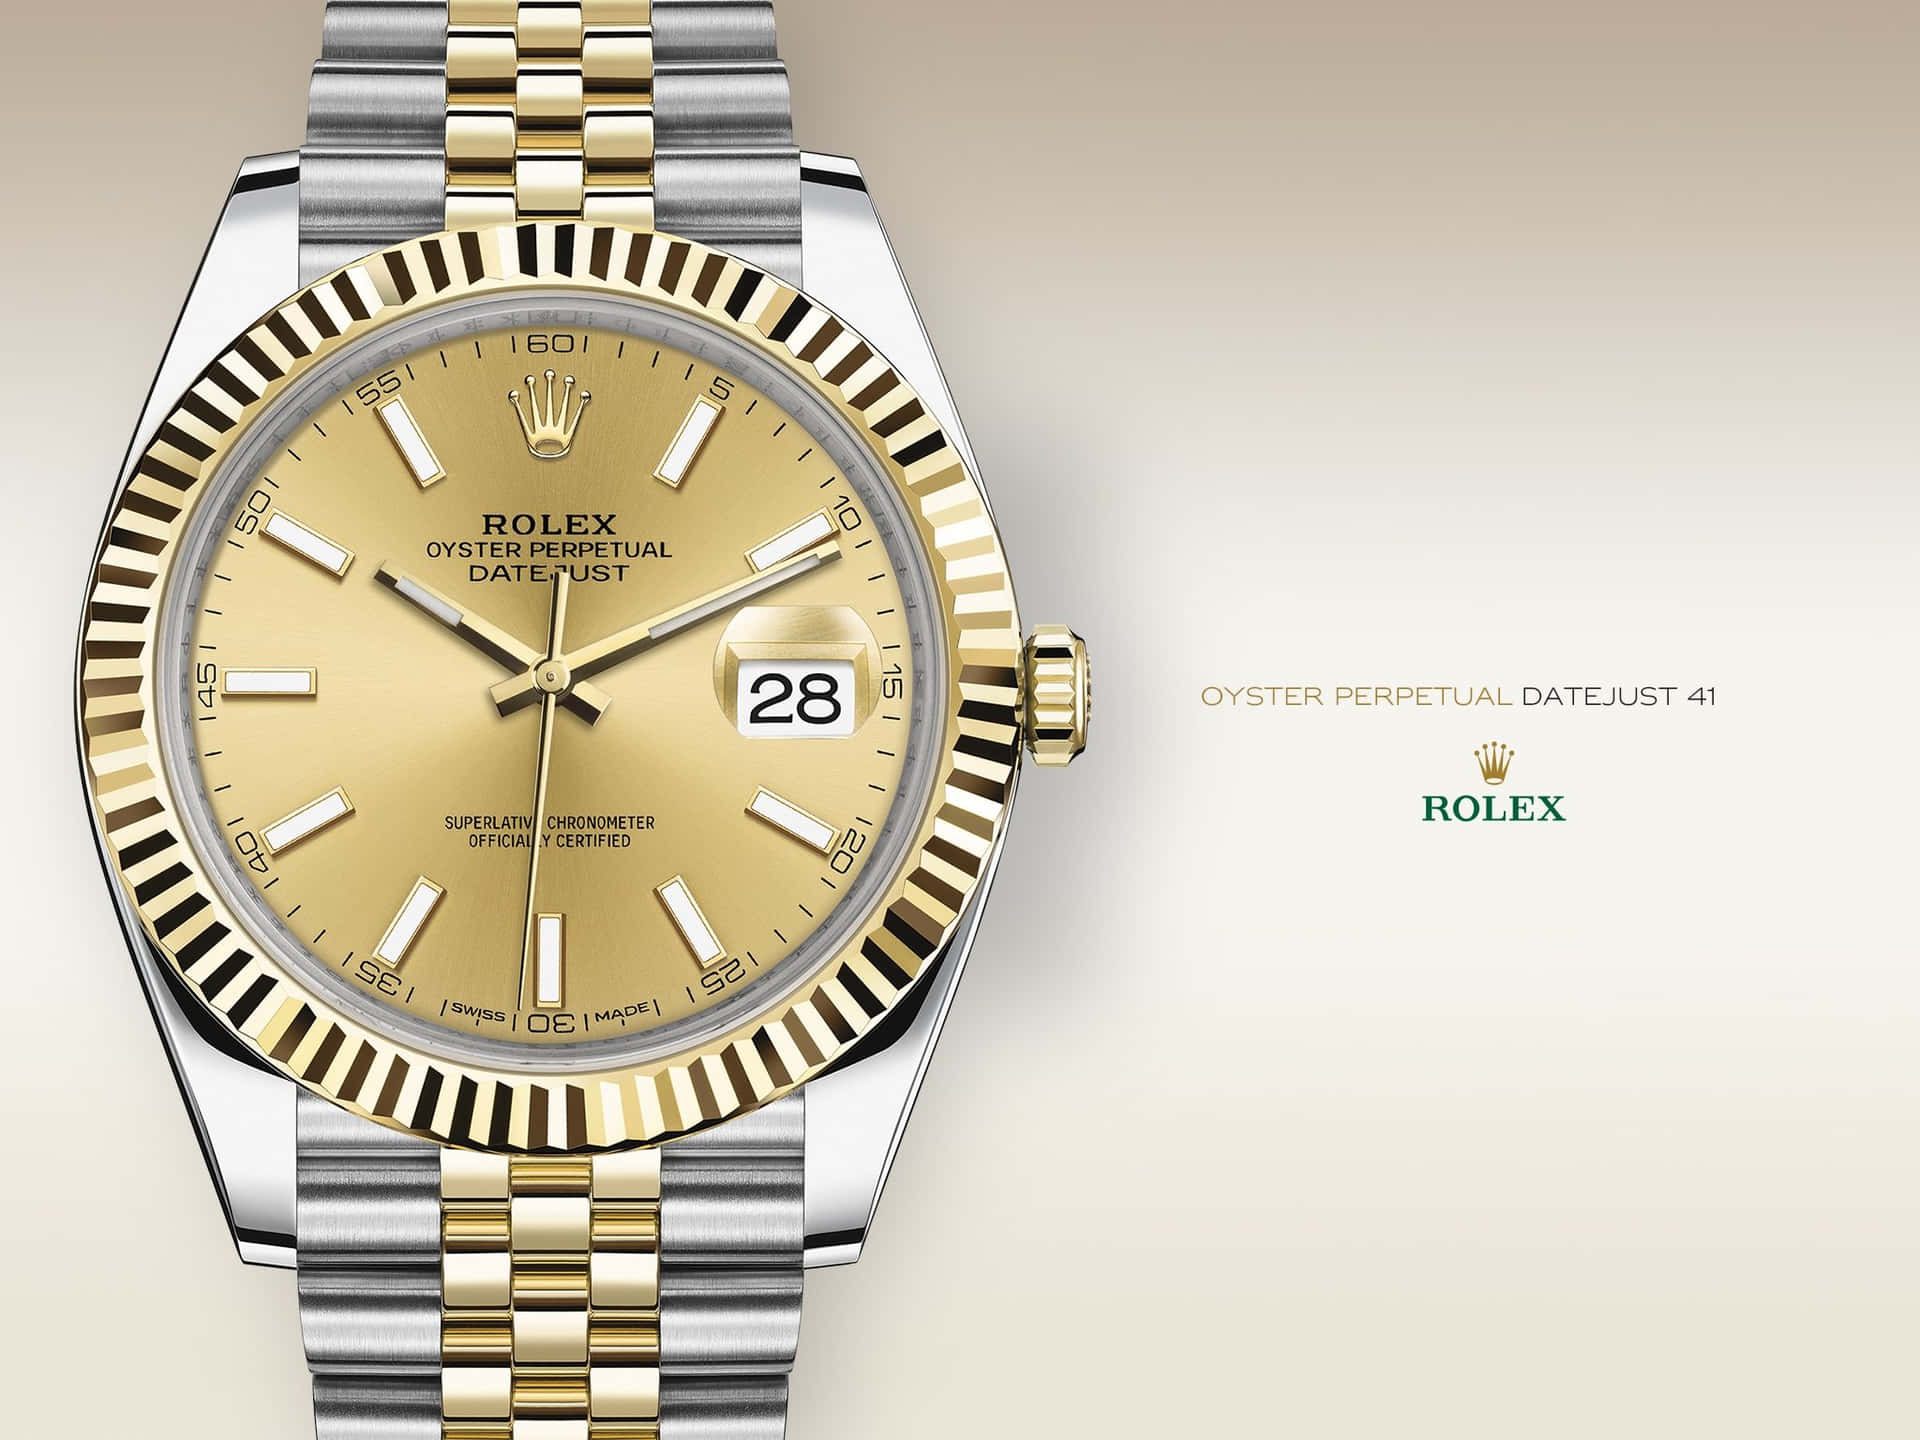 Captivating Rolex Timepiece on display